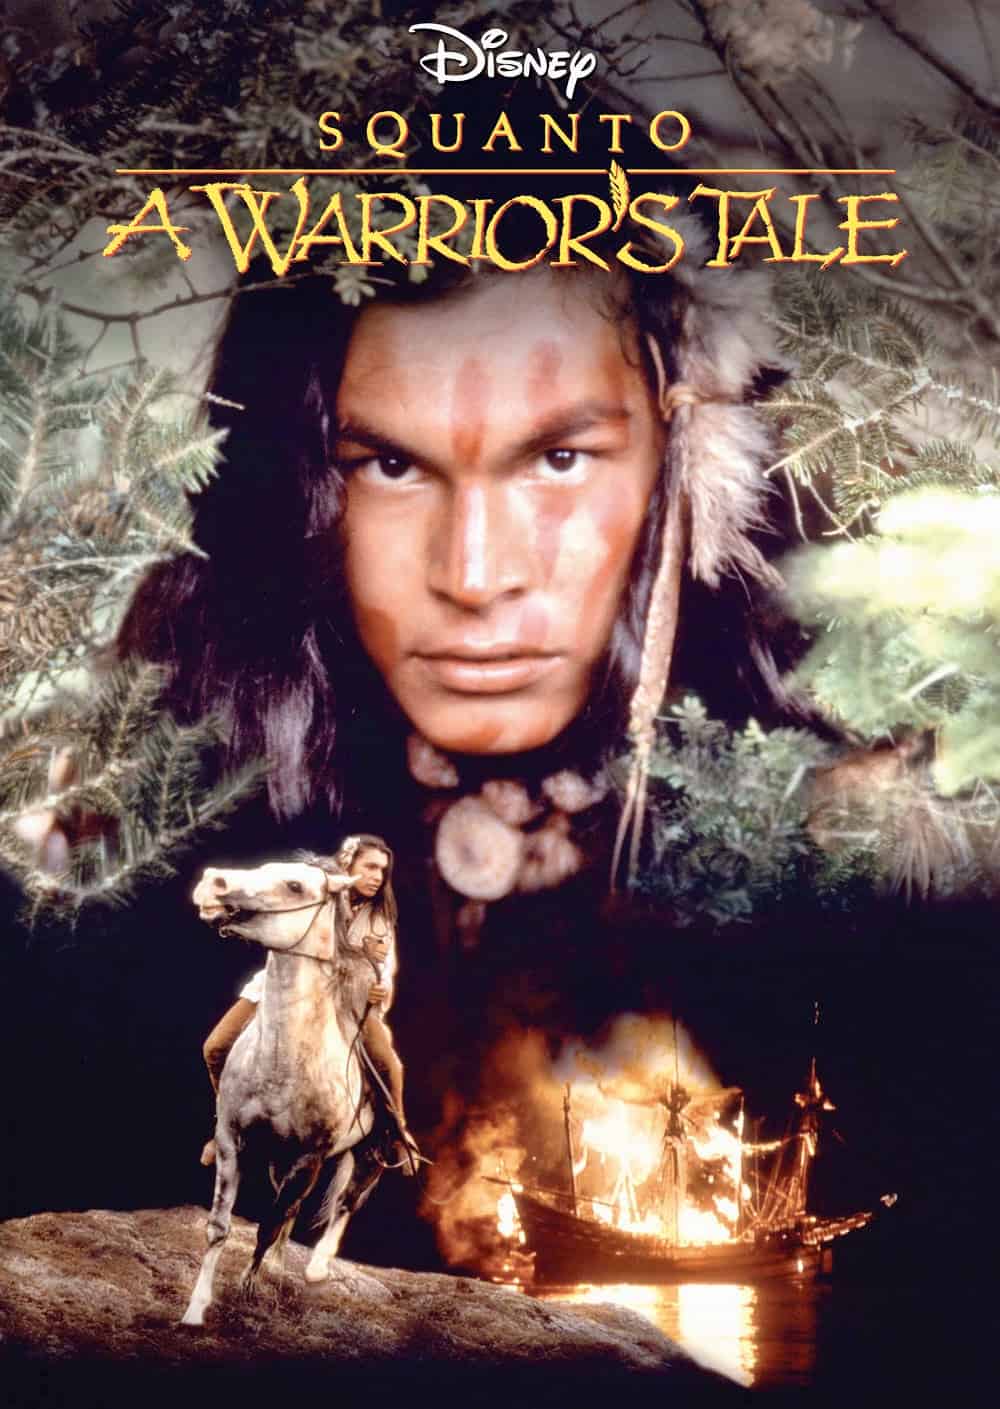 Disney's Squanto: A Warriors Tale Movie Review